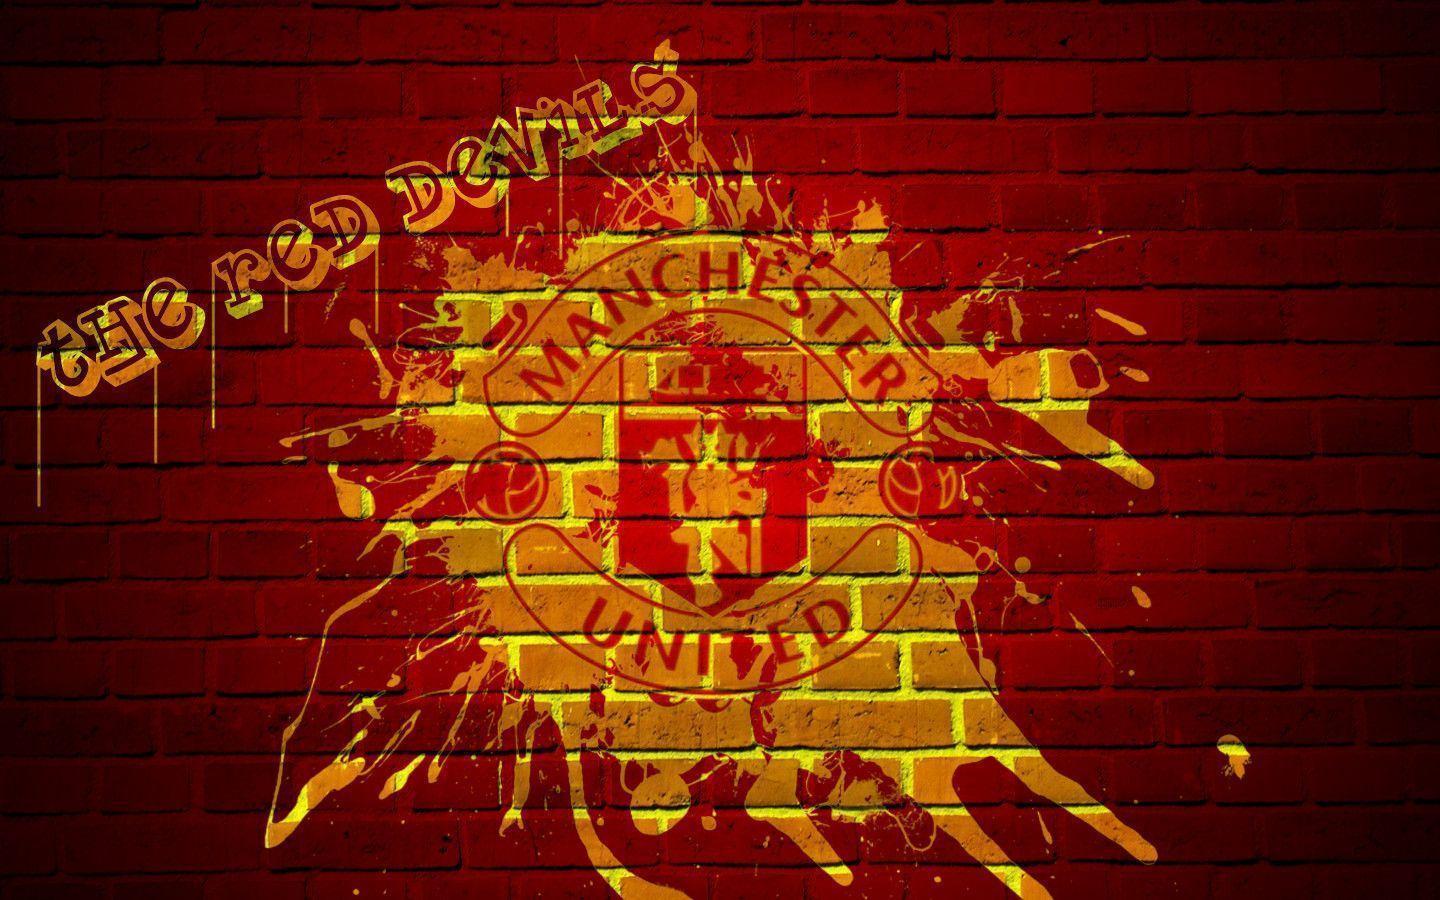 Manchester United Wallpapers HD - Wallpaper Cave